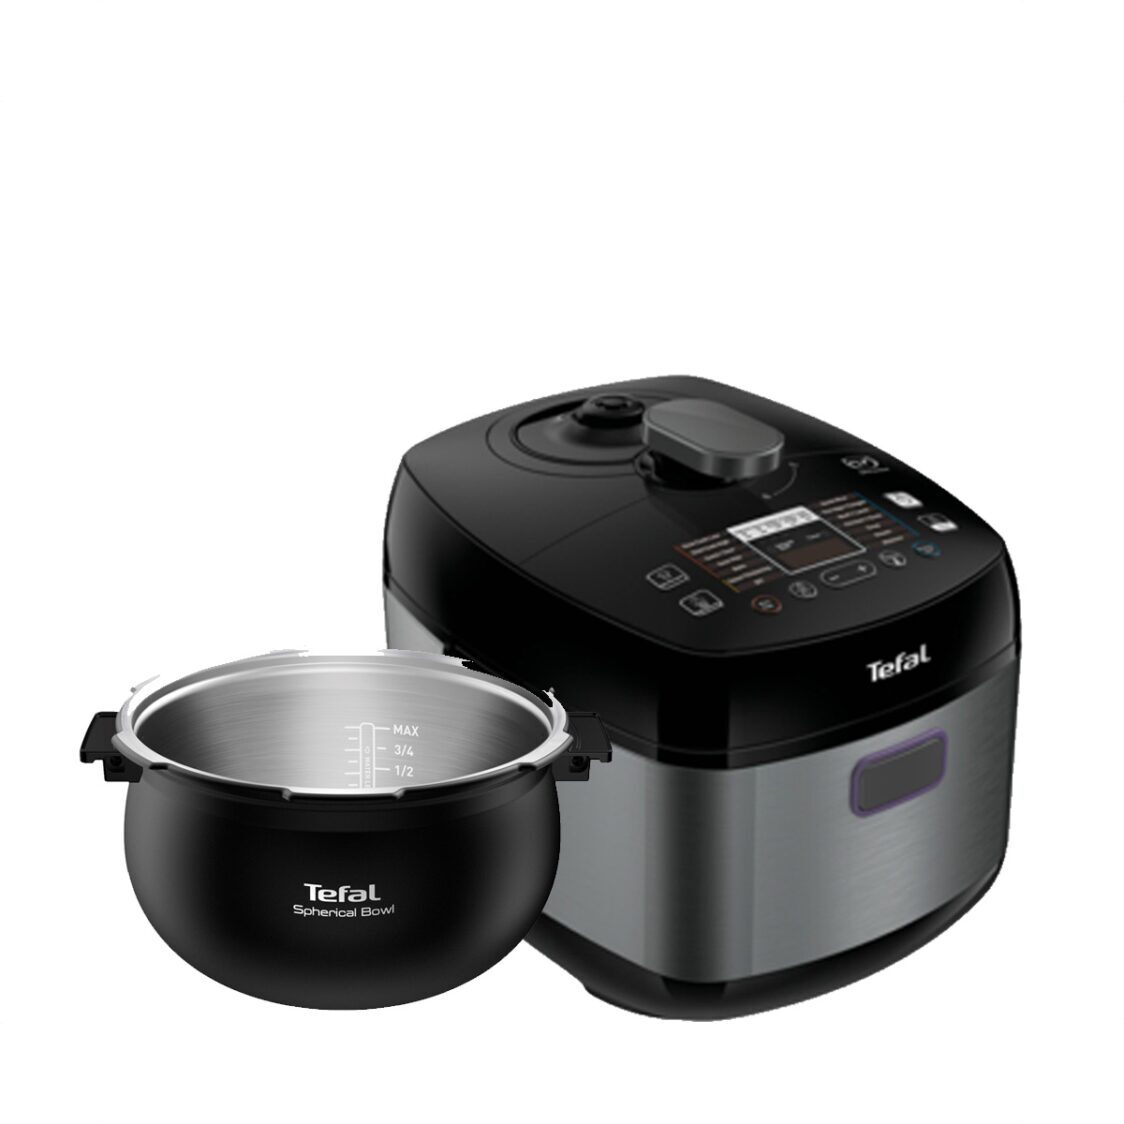 Tefal Home Chef Smart Pro Multicooker [With Pot] CY625 + Pot